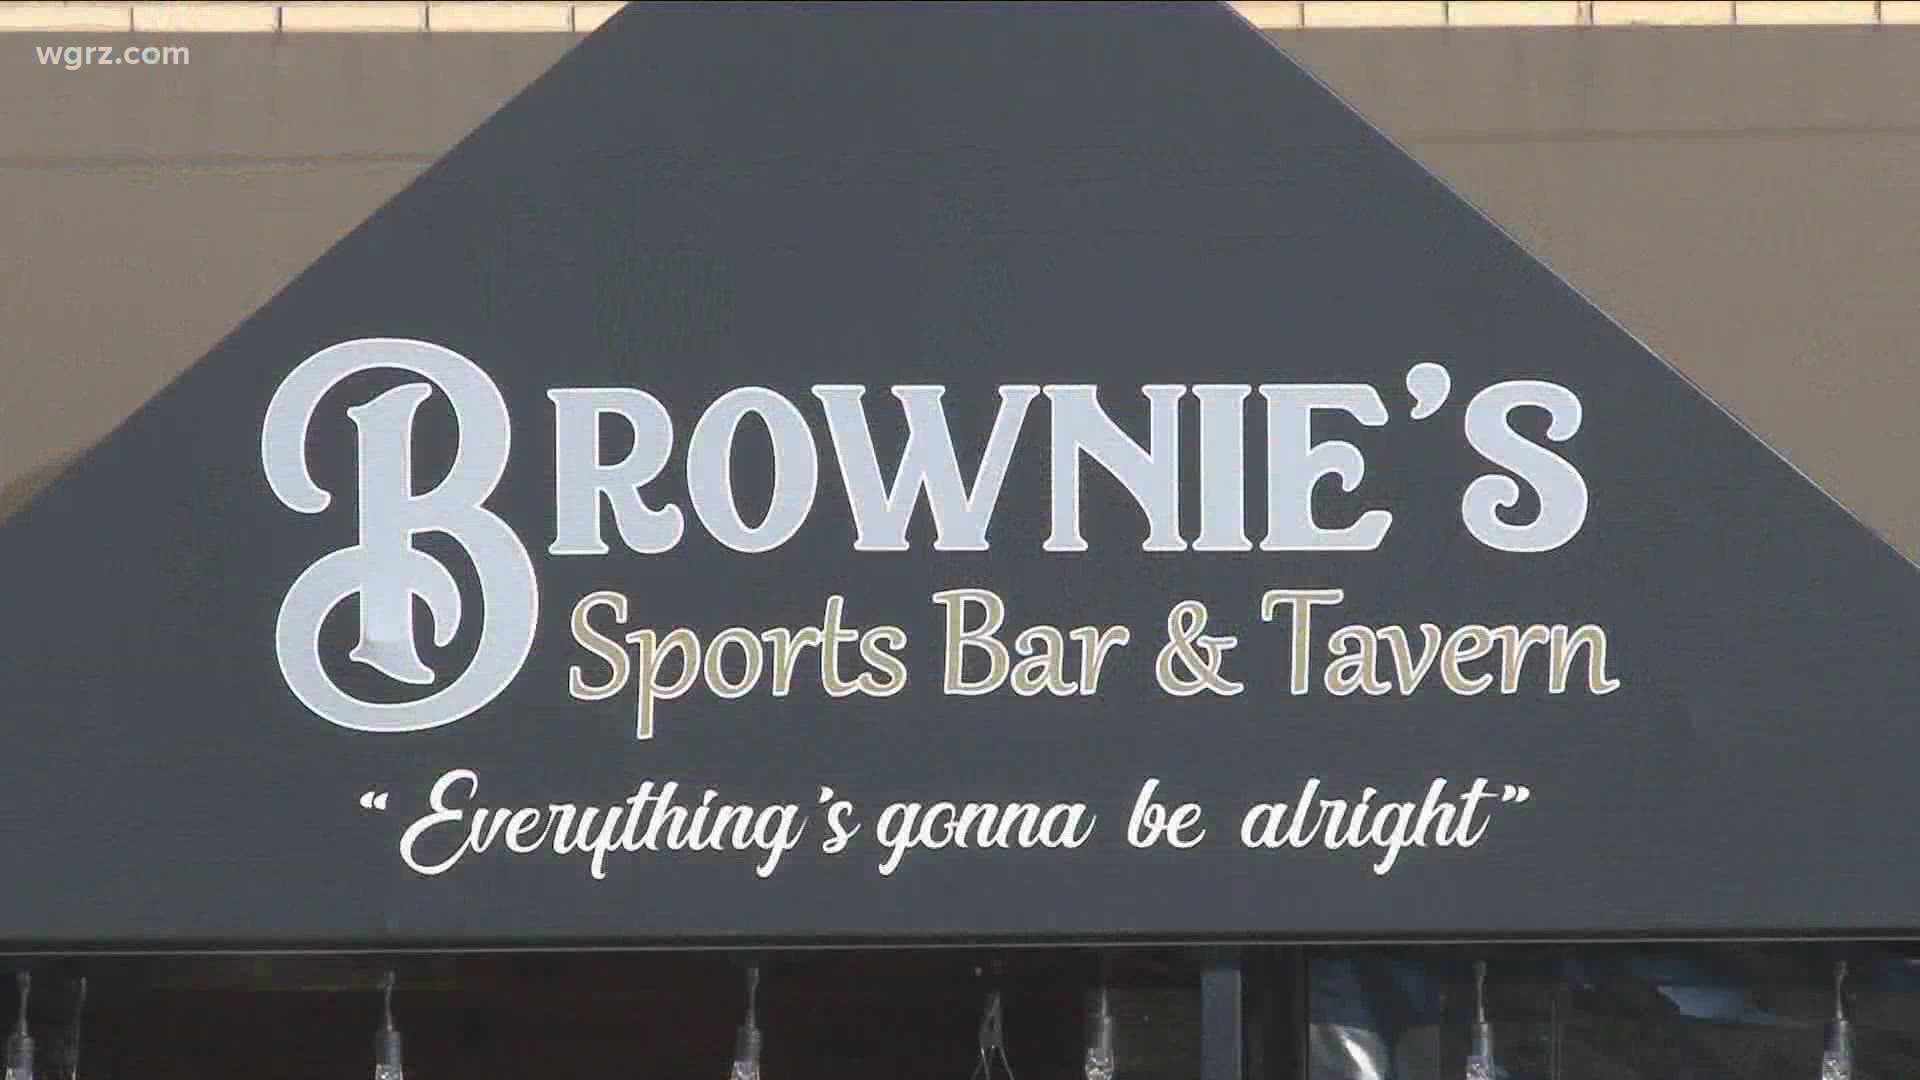 Owner Stephen Brown says the restaurant will reopen on March 2nd, and they are planning something special to mark the occasion.